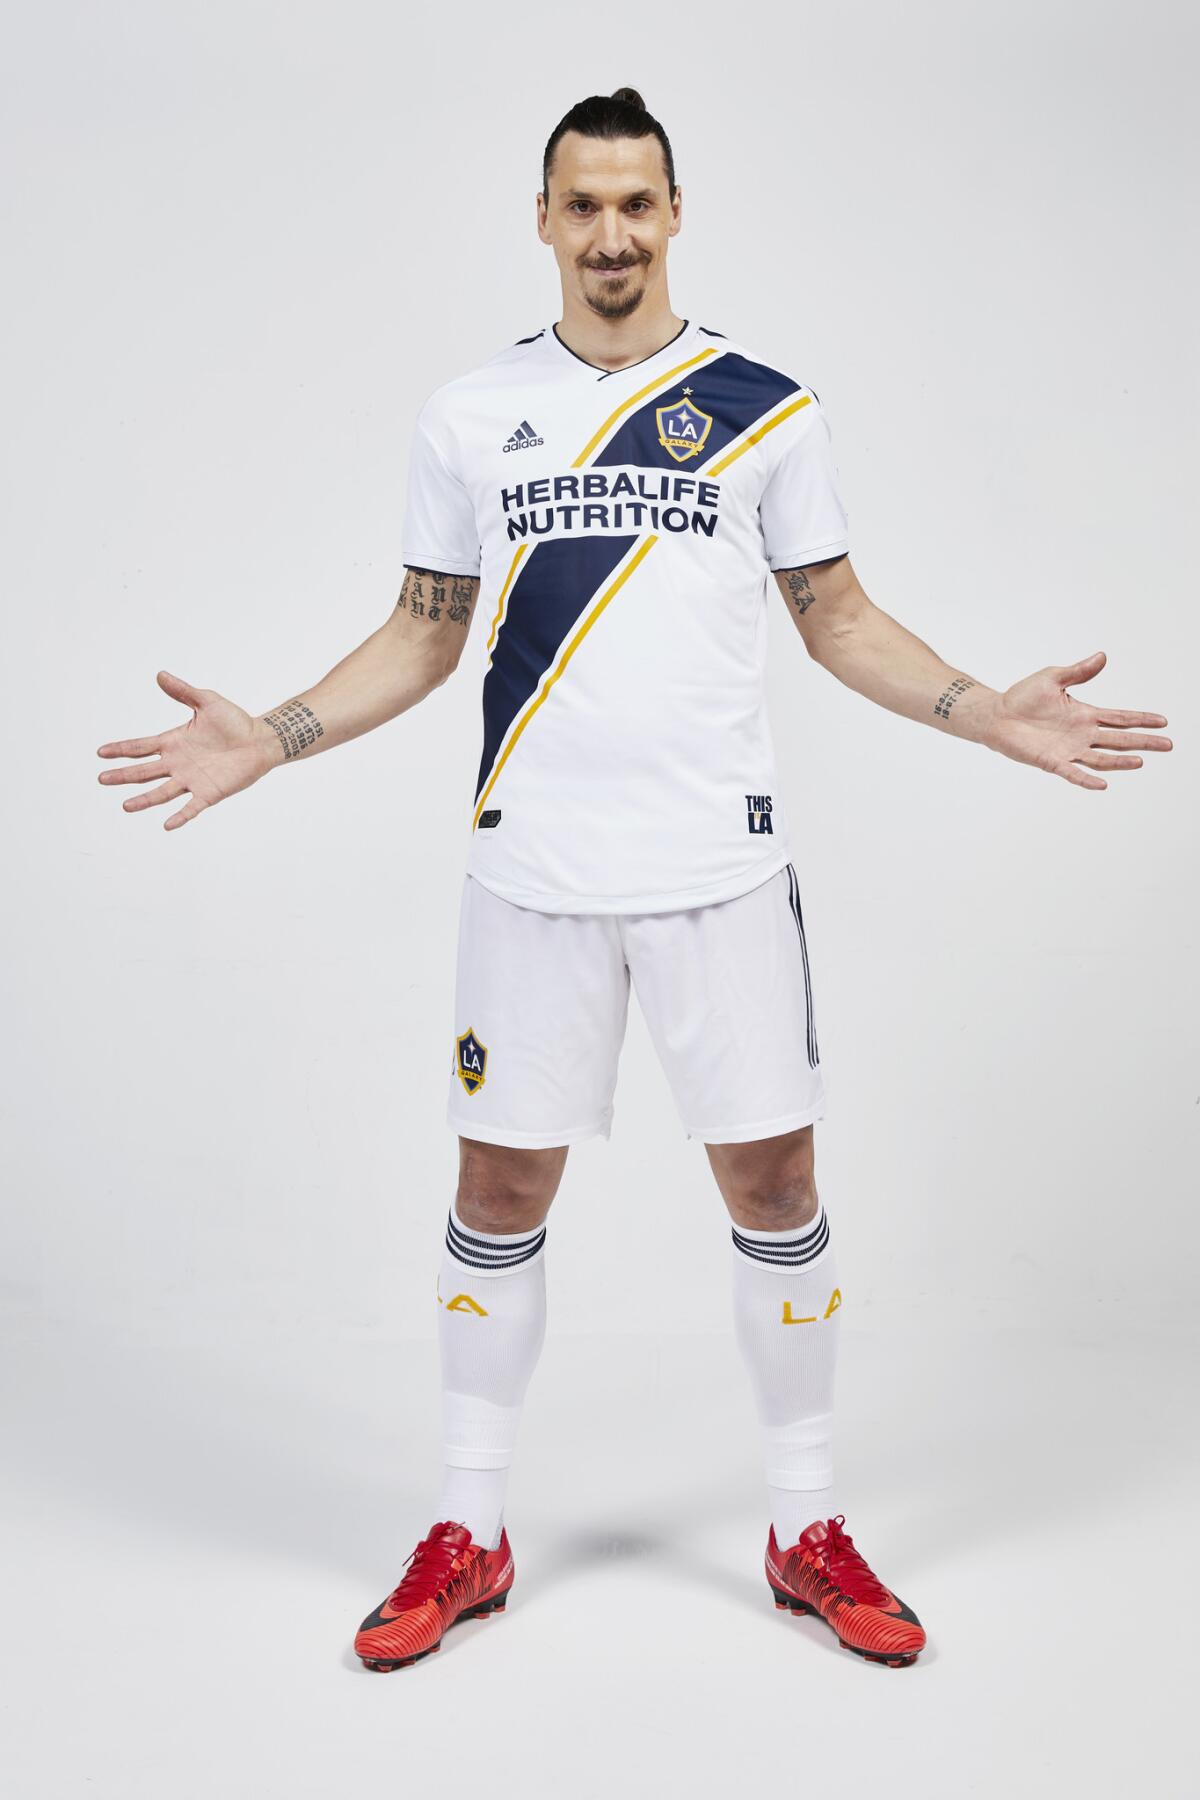 In this photo provided Friday, March 23, 2018, by the LA Galaxy, forward Zlatan Ibrahimovic, of Sweden, poses in the uniform of his new club. The 36-year-old forward comes to the MLS soccer club from Manchester United, where he played for two seasons. He made 53 appearances with the club, scoring 29 goals.